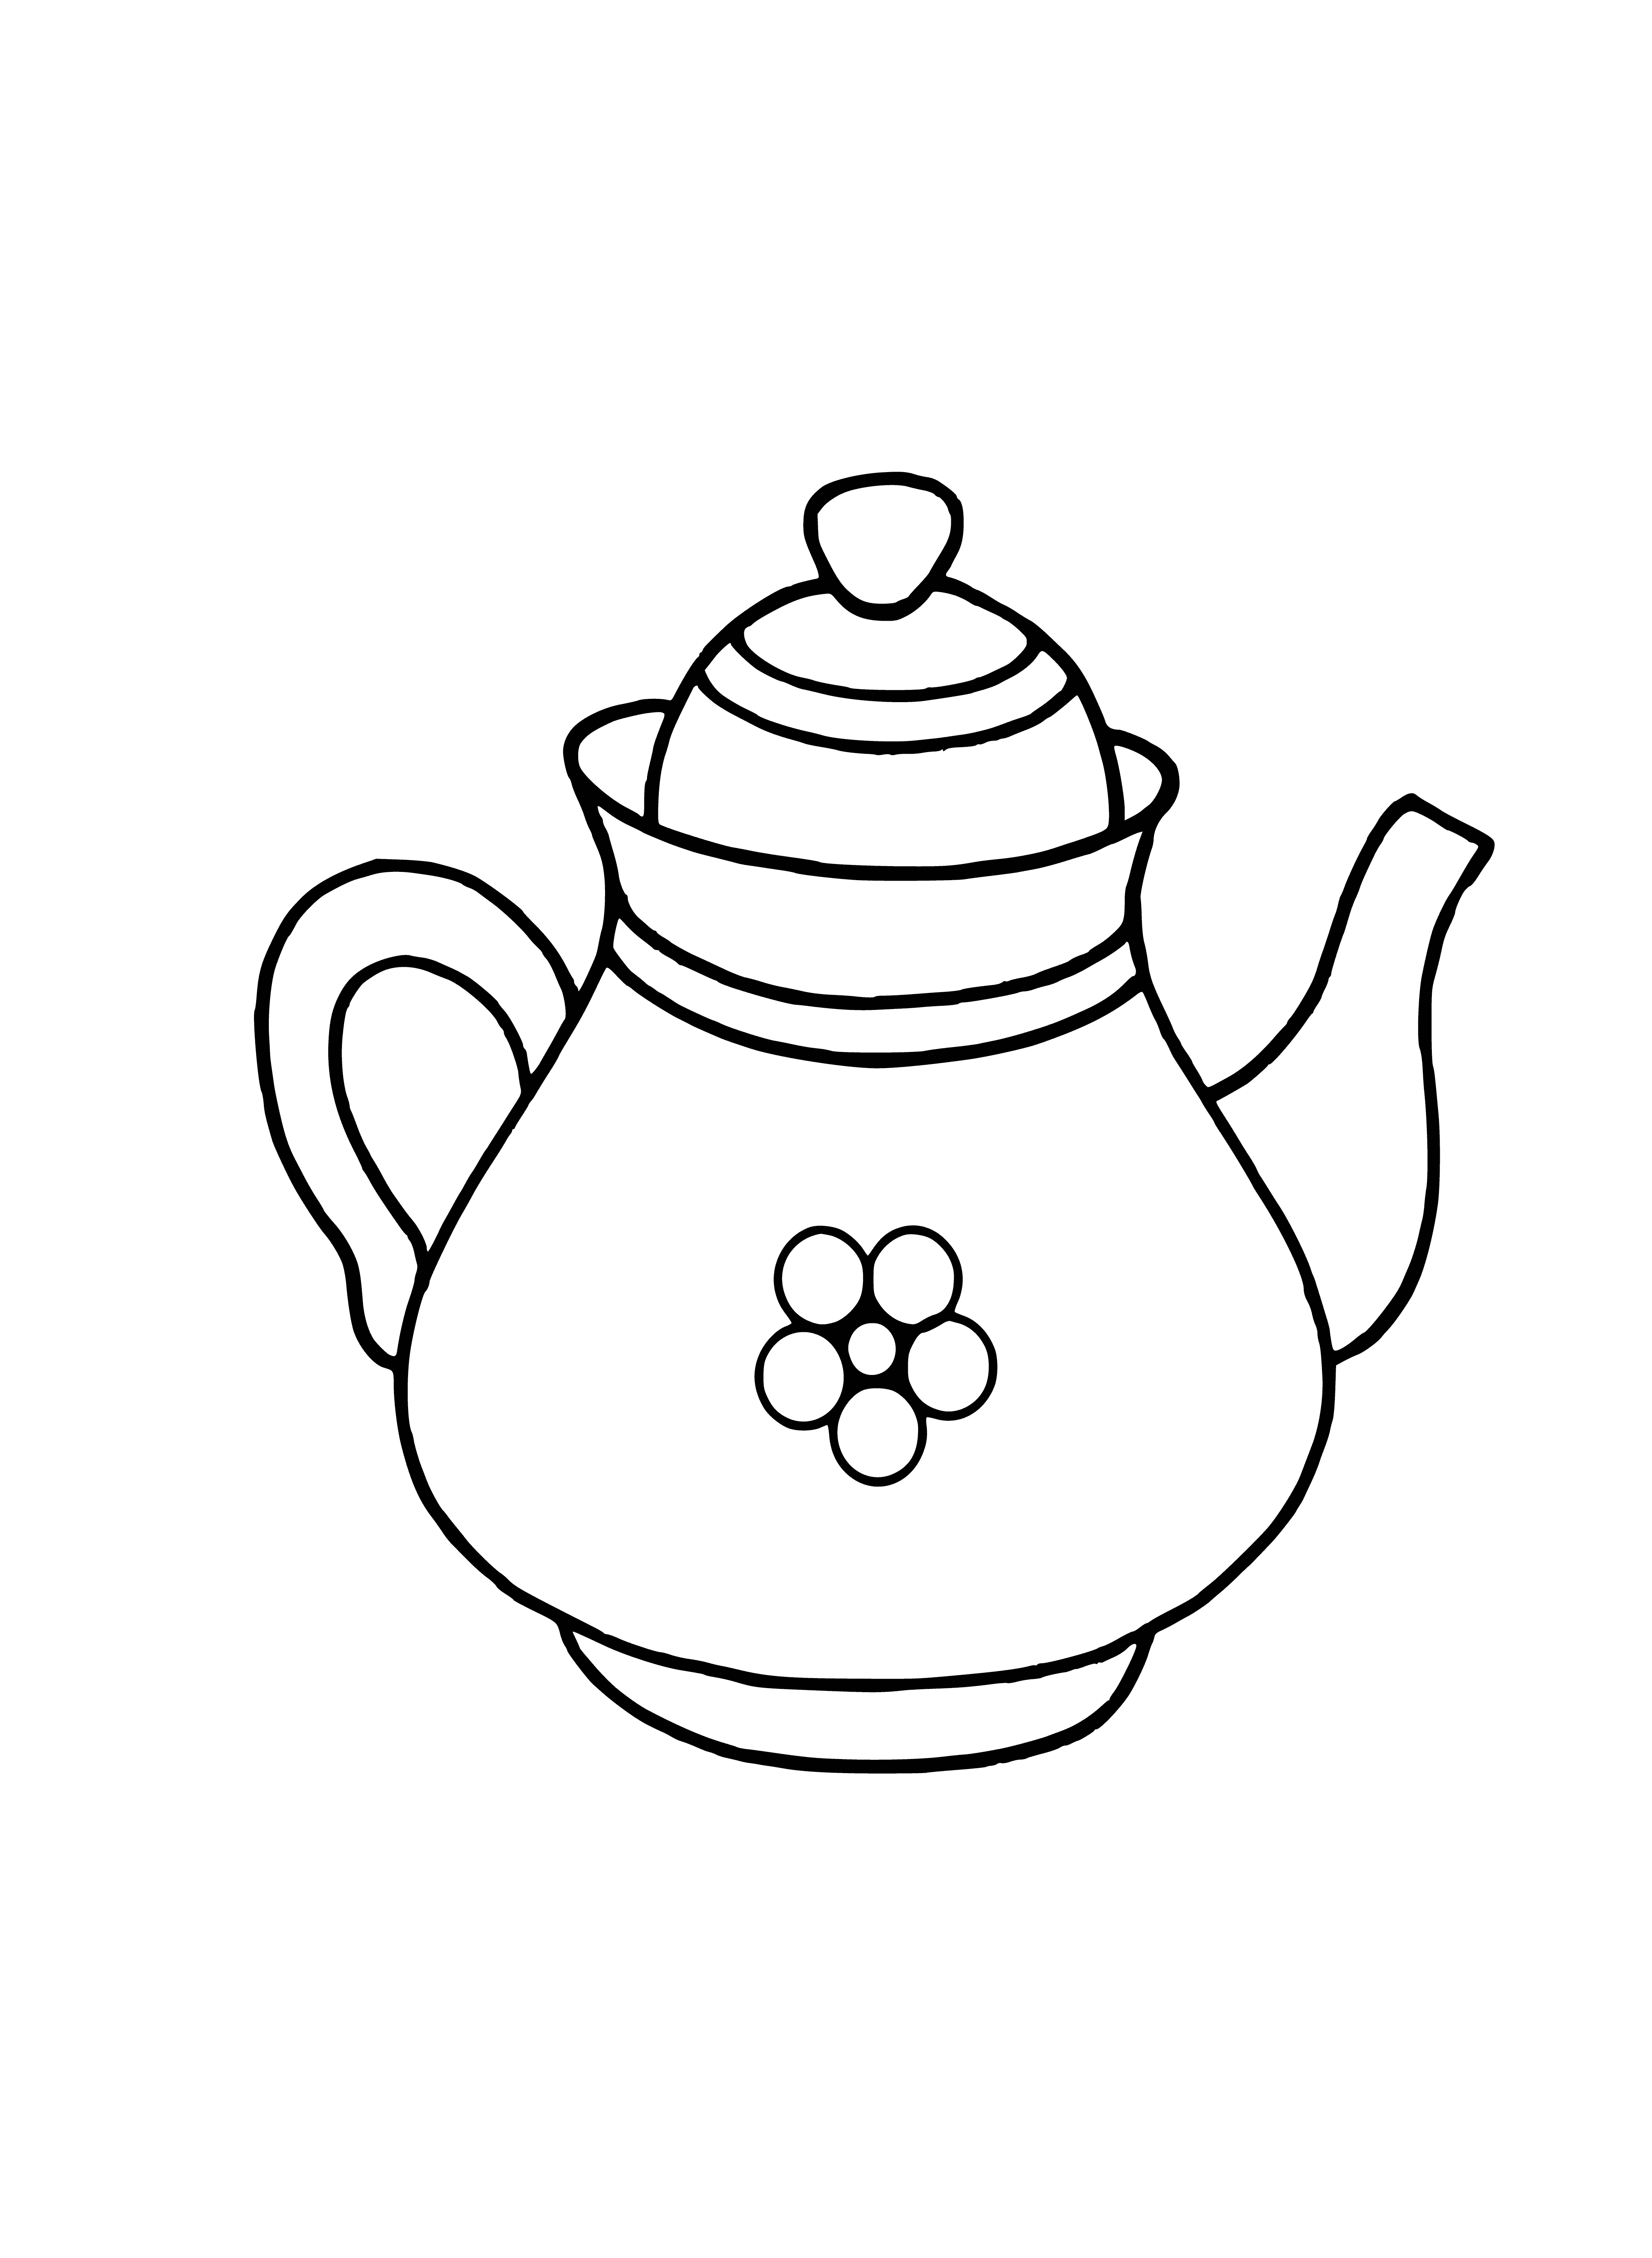 coloring page: White teapot w/gold details, handle & knob; gold design around body.